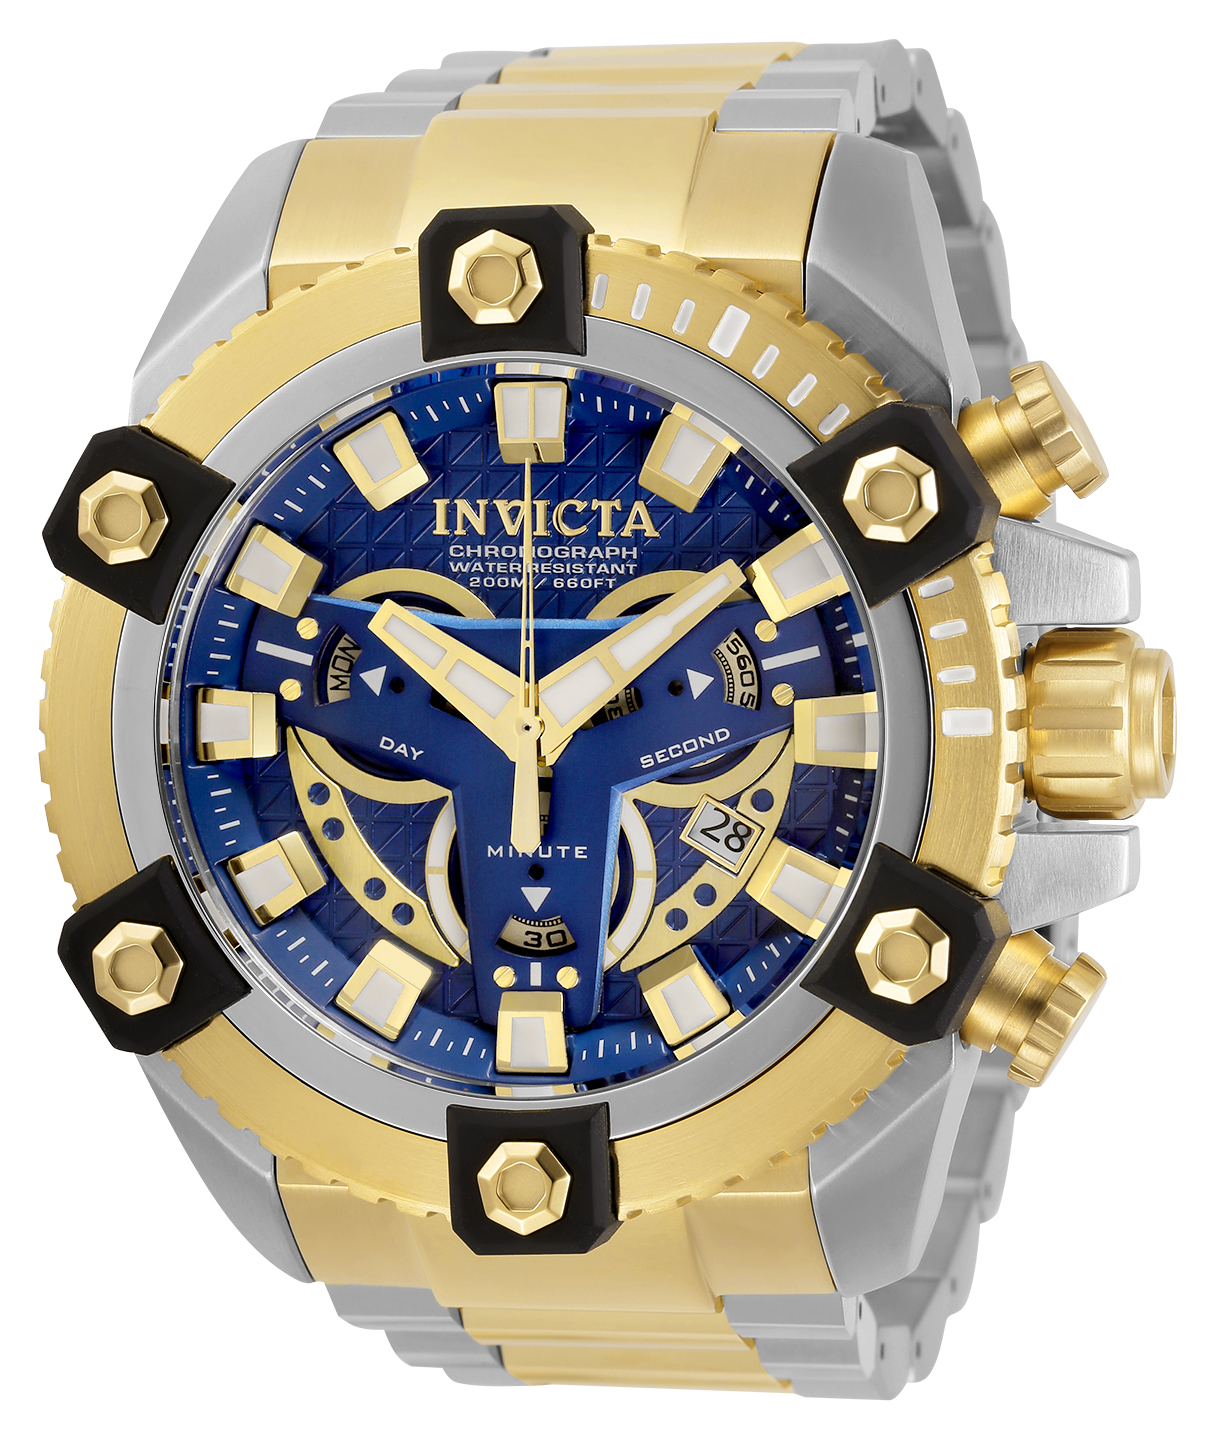 Invicta Coalition Forces Men's Watch - 56mm, Steel, Gold (32627)